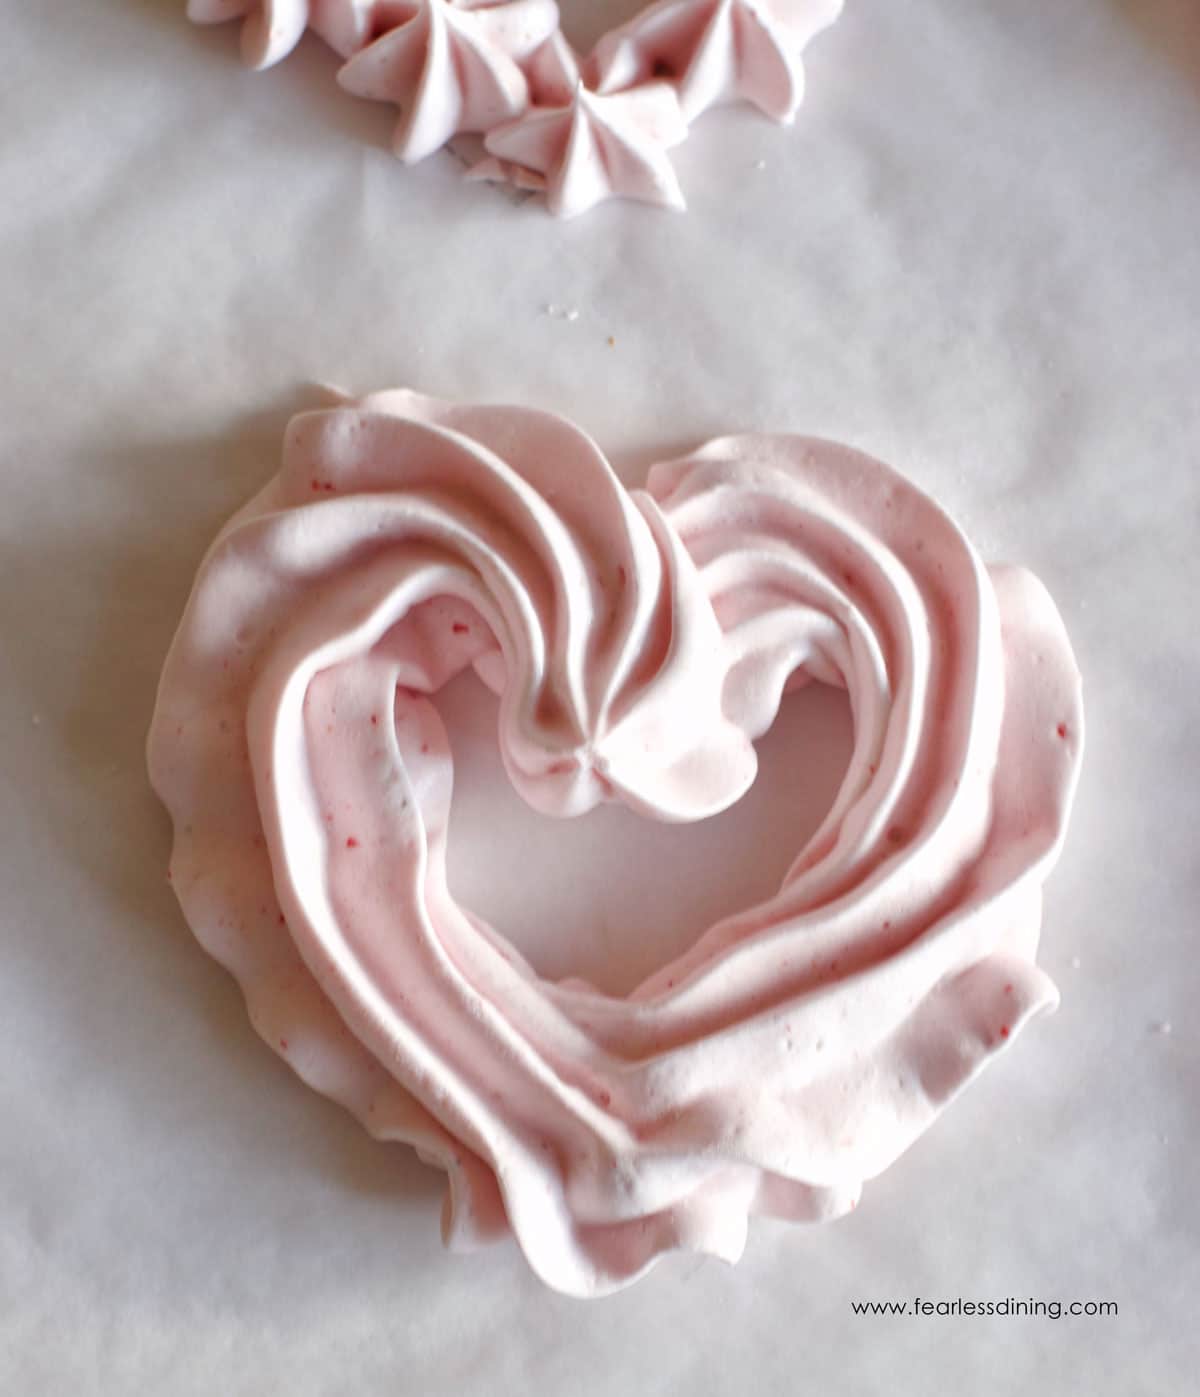 A baked heart shaped meringue cookie on a tray.